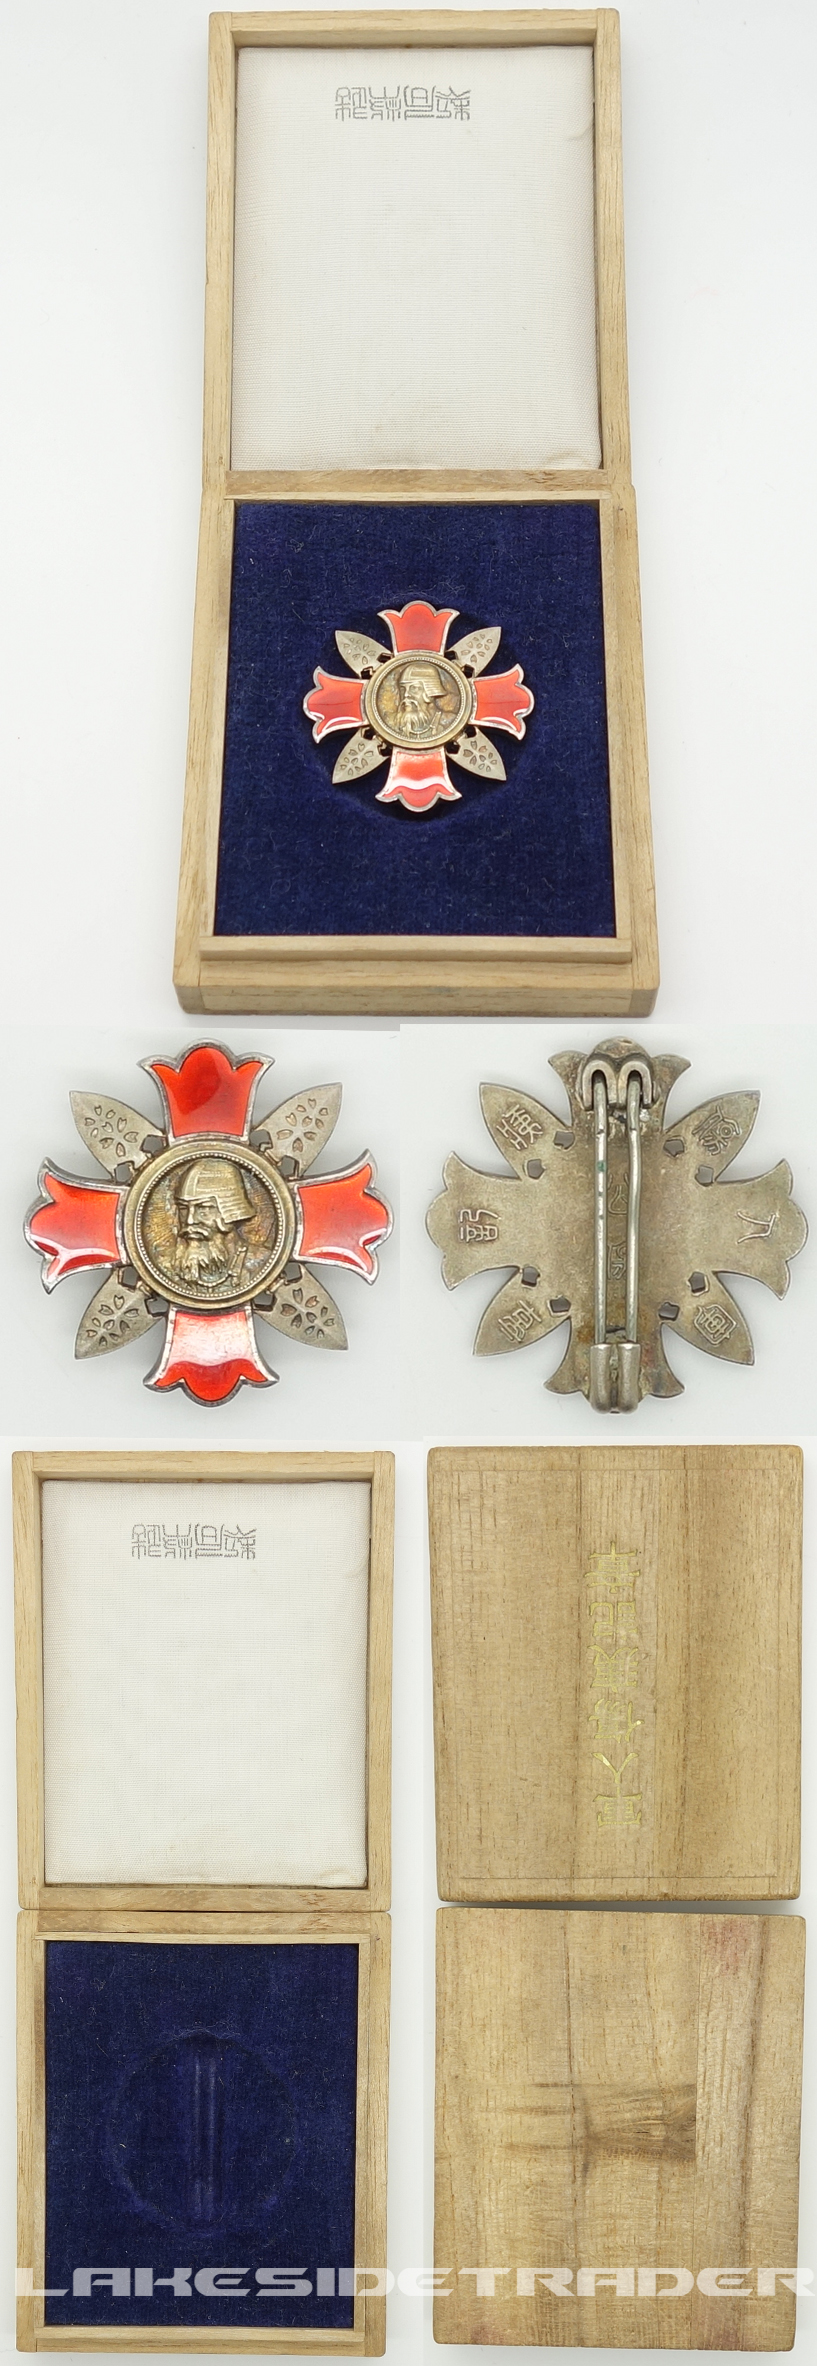 Cased Type 2 Wound Badge